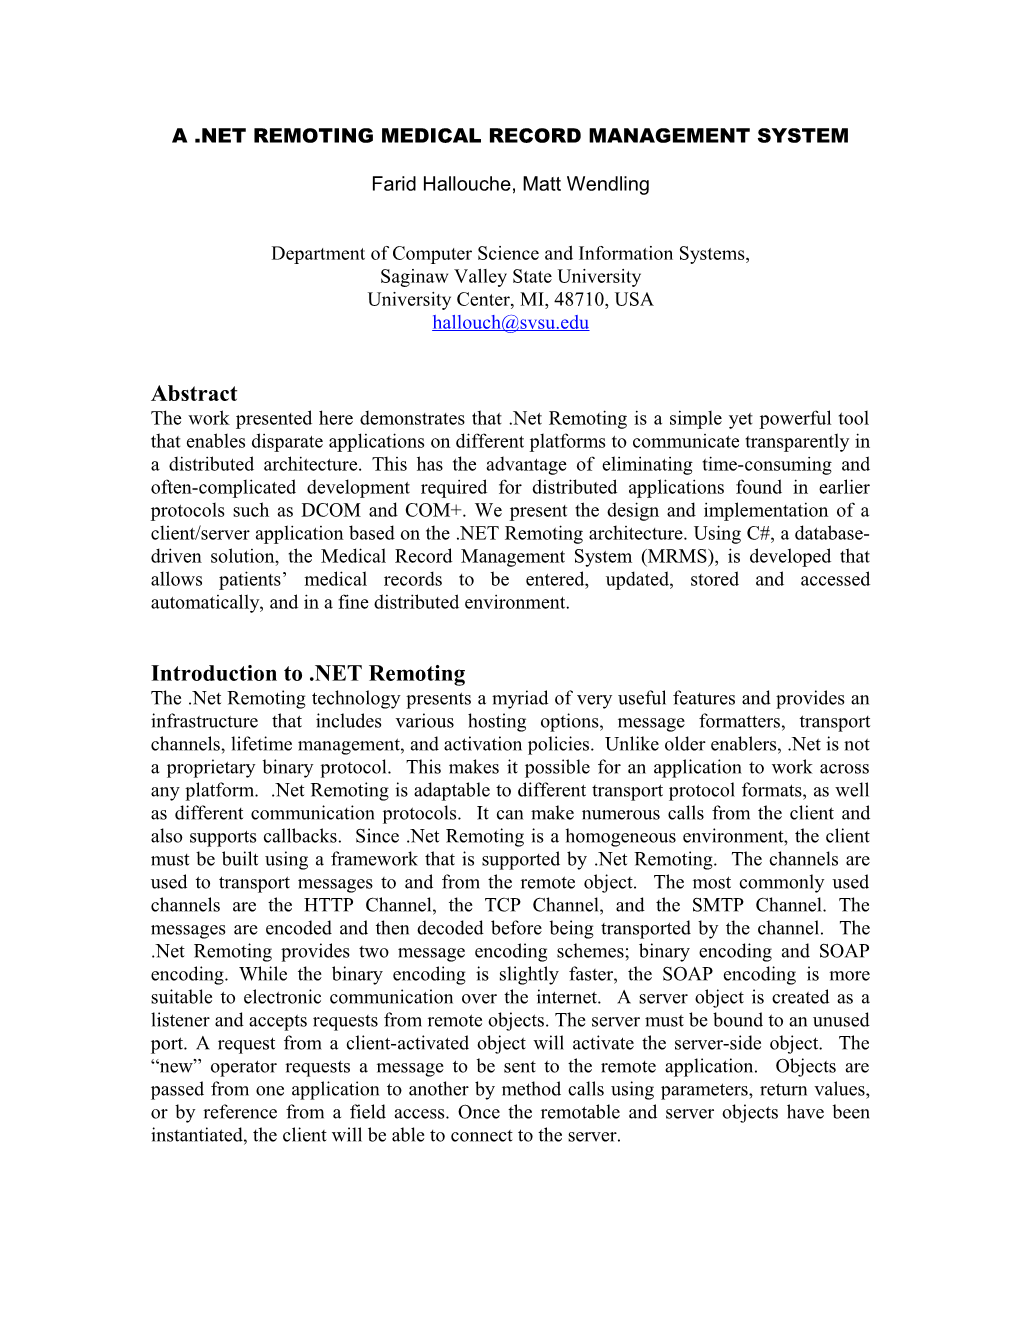 Design and Implementation of a Teaching and Research Computing Network Infrastructure